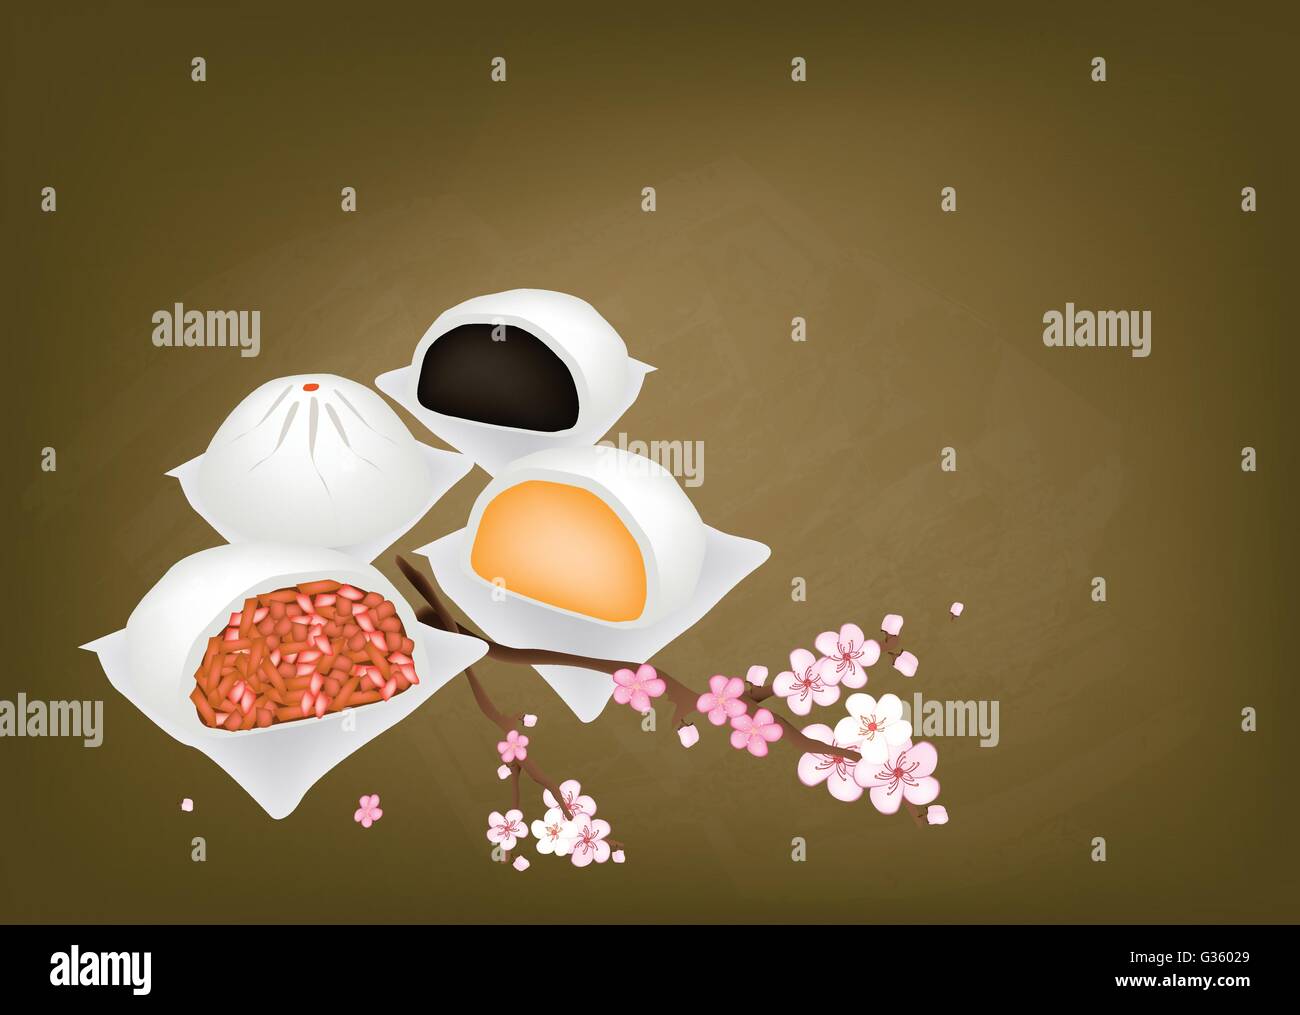 Chinese Cuisine, Illustration of Chinese Steamed Bun on Chalkboard. One of Most Popular Dumplings in China. Stock Vector